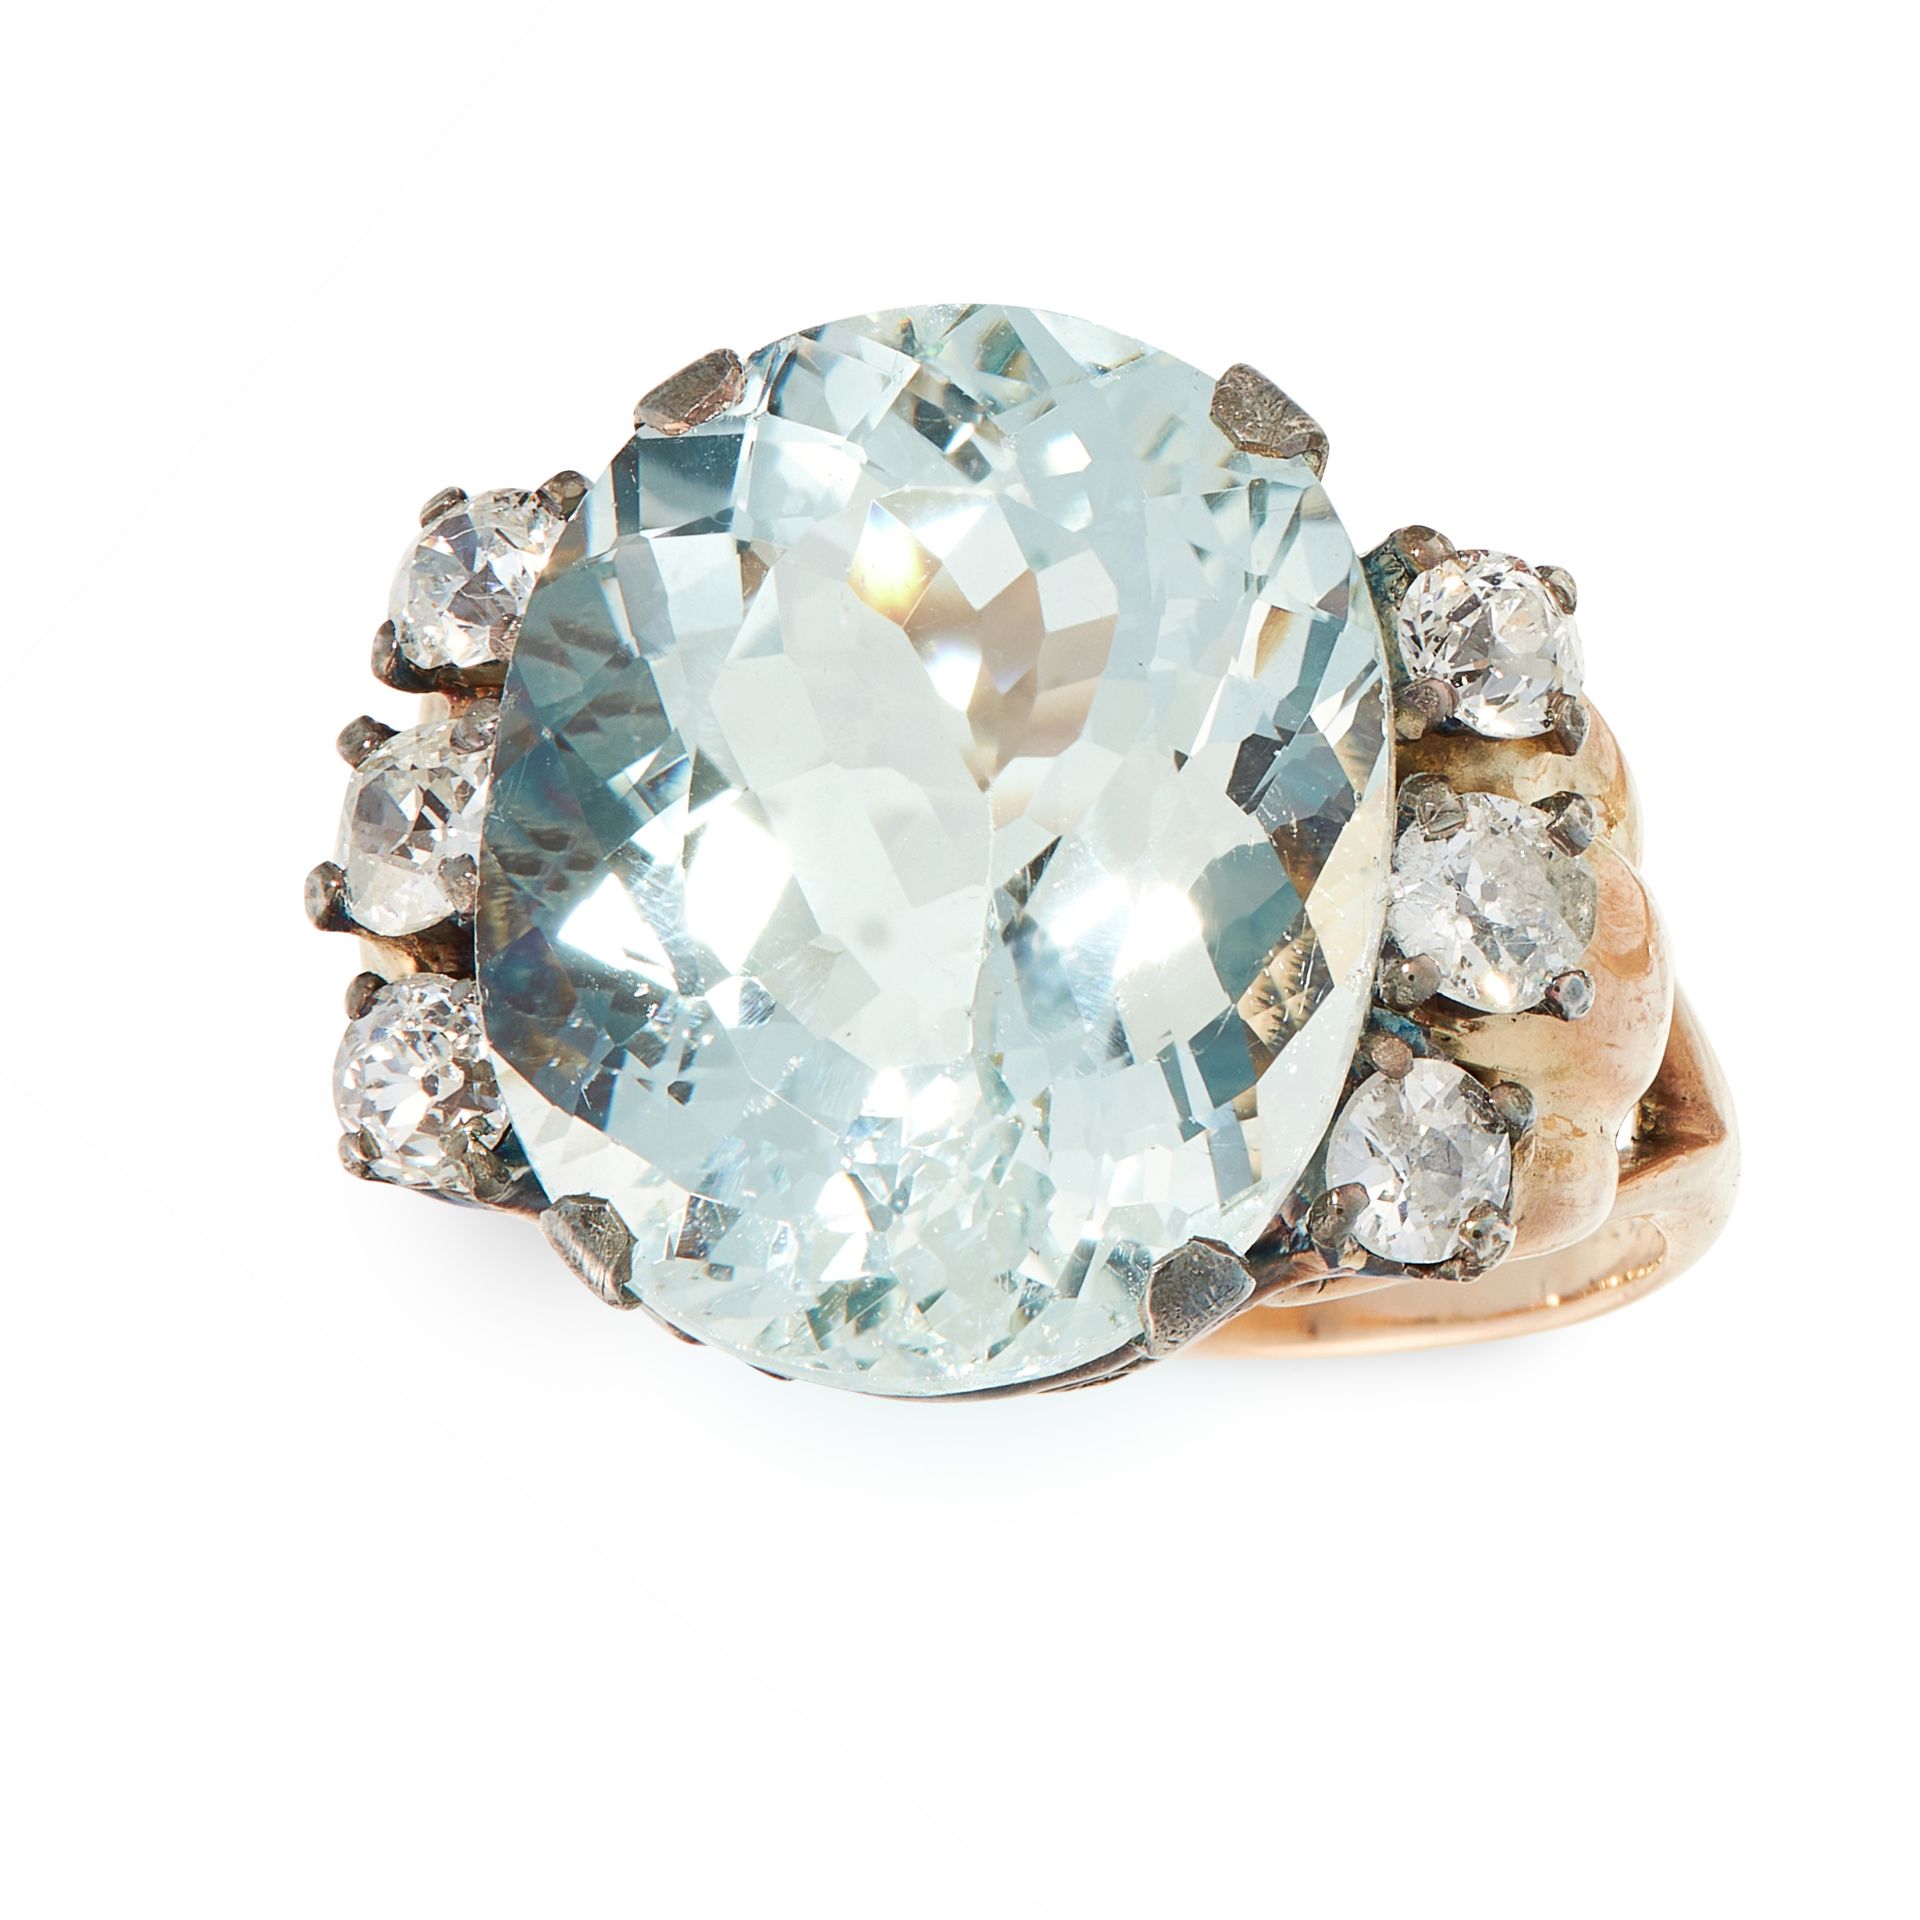 AN AQUAMARINE AND DIAMOND DRESS RING in yellow gold and silver, set with an oval cut aquamarine of